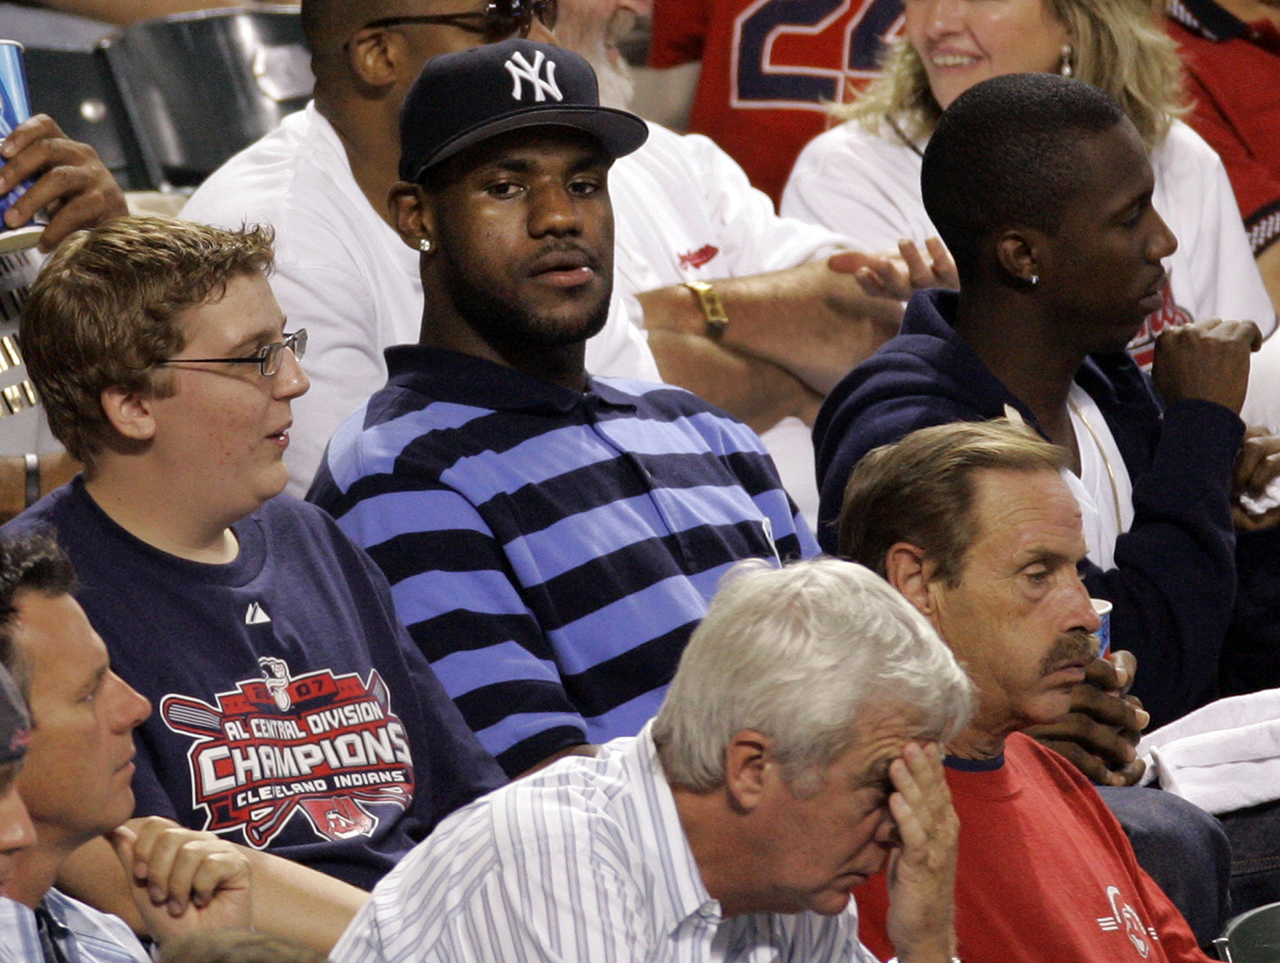 Cleveland Cavaliers LeBron James, wearing a New York Yankees hat, watches  Game 1 of an American League Division Series baseball game between the Yankees and Cleveland Indians Thursday, Oct. 4, 2007, in Cleveland. (AP Photo/Amy Sancetta)